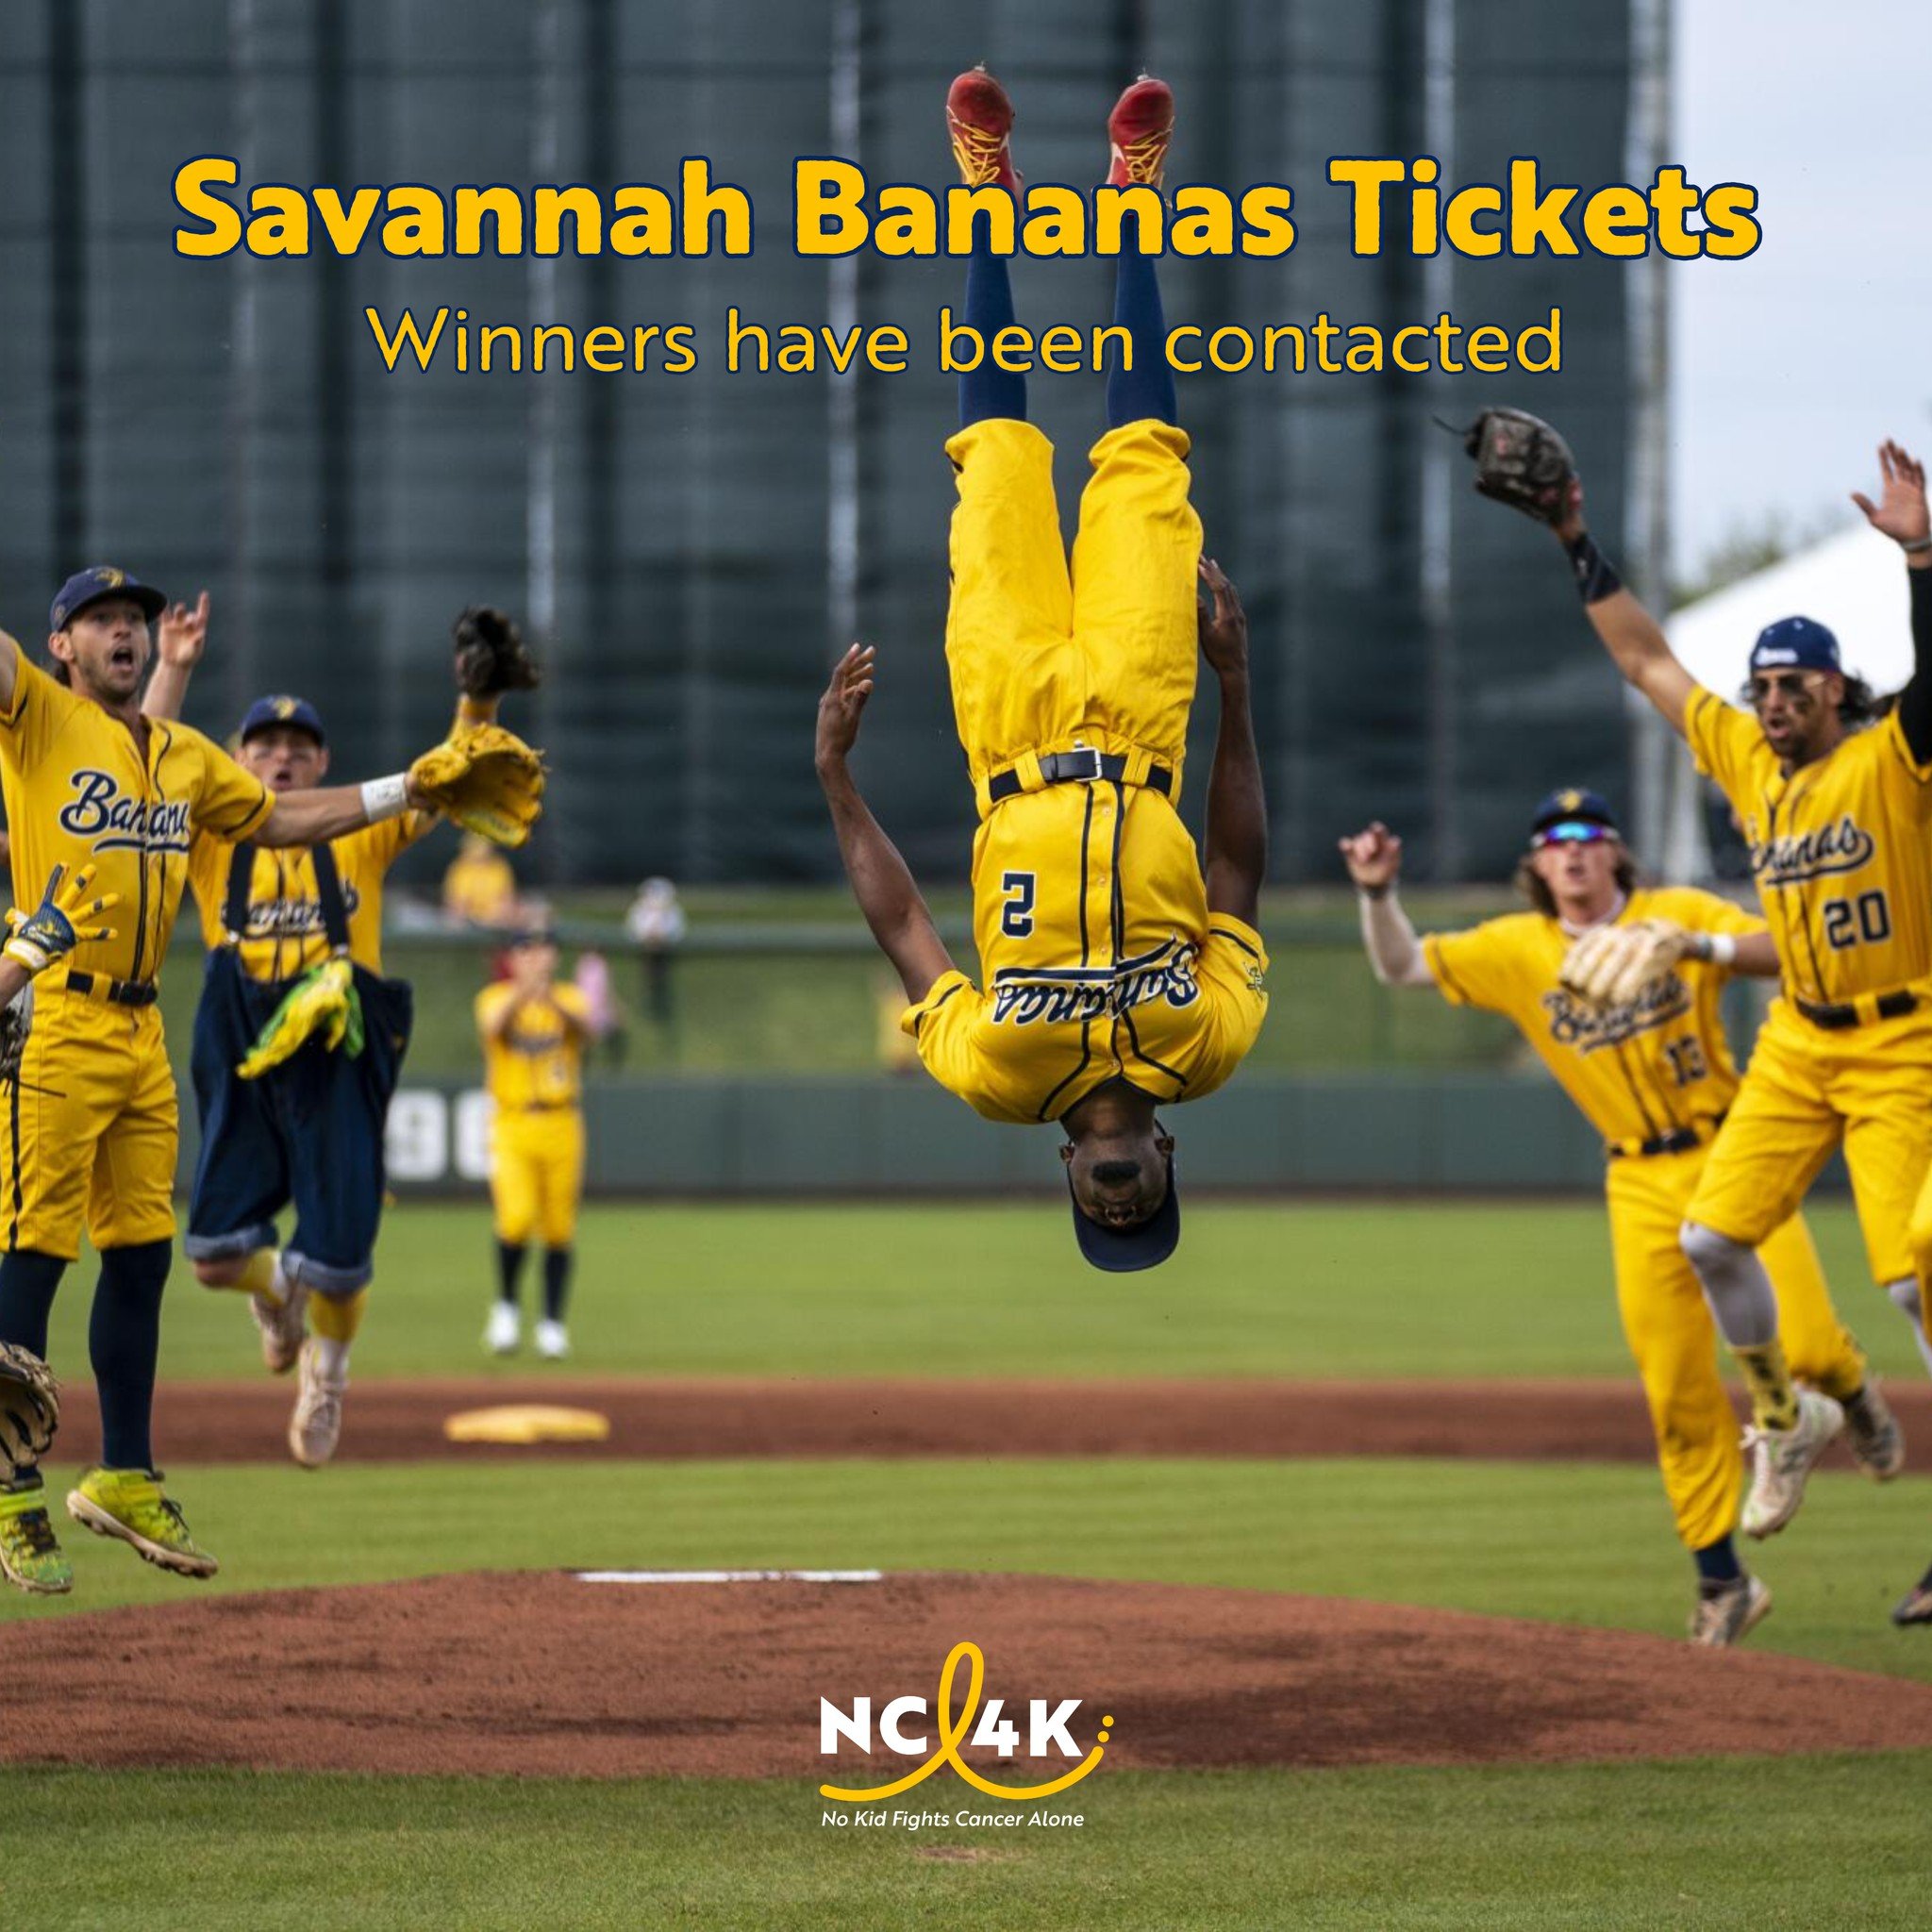 Thank you to everyone who entered the Savannah Bananas ticket raffle! We have reached out to those who won the ticket packages. All the money raised by purchasing tickets to the raffle helped support kids and teens fighting cancer and their families.